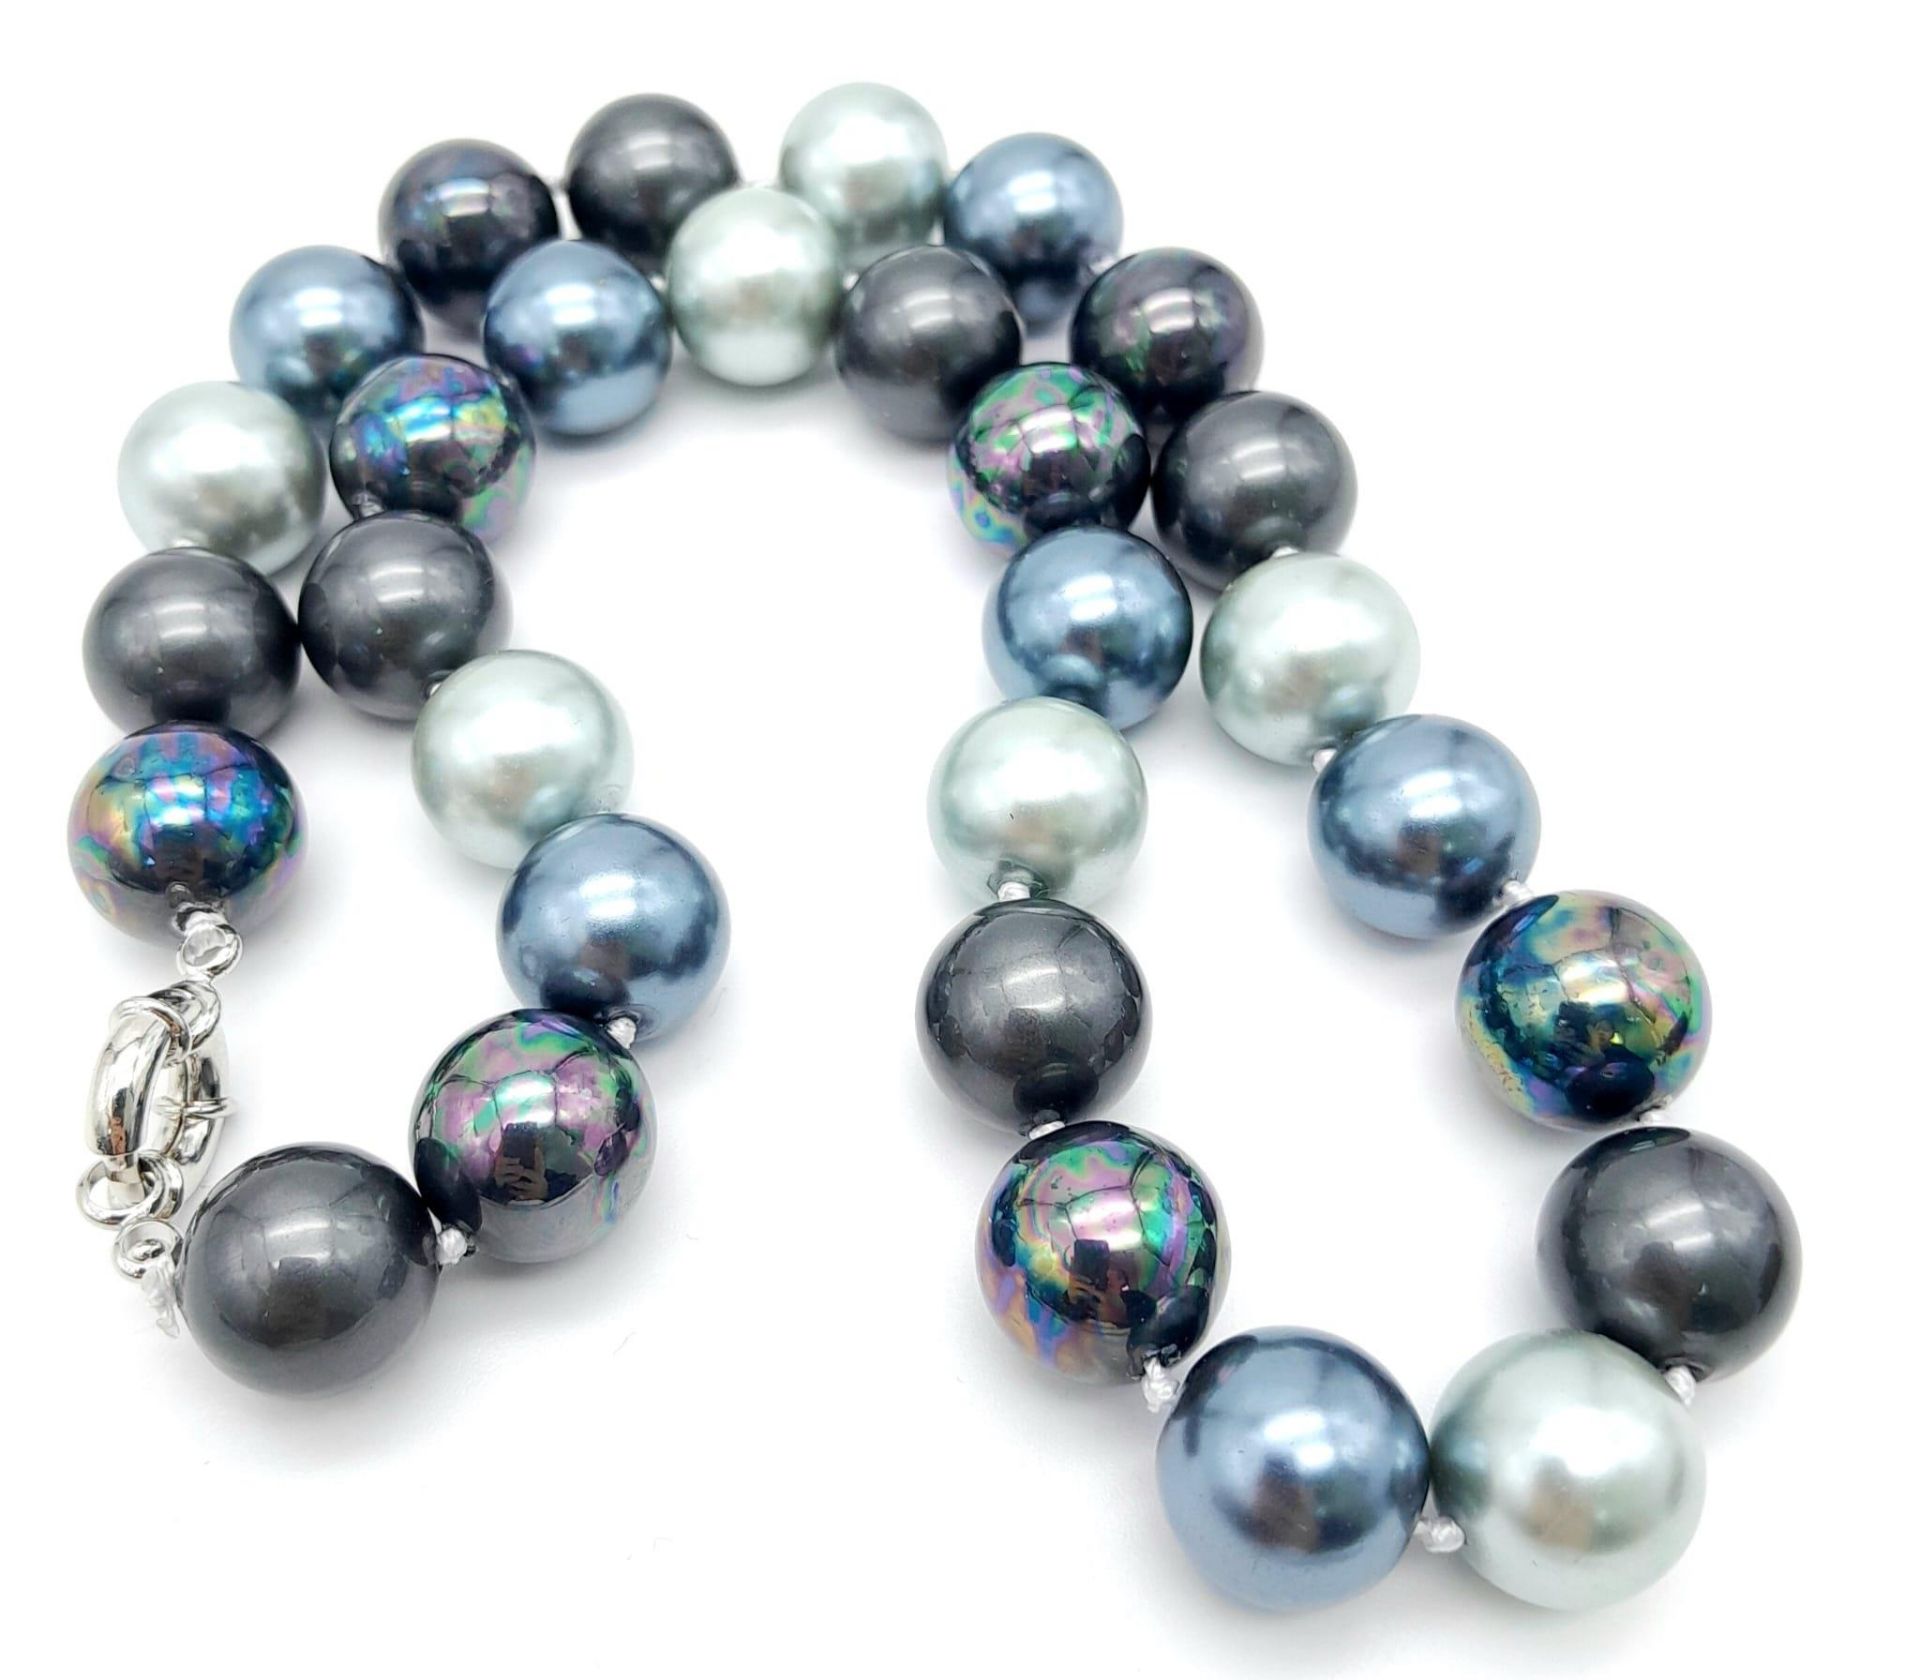 A Vibrant Metallic Shades of Grey South Sea Pearl Shell Necklace. 14mm beads. 42cm necklace length. - Image 4 of 7